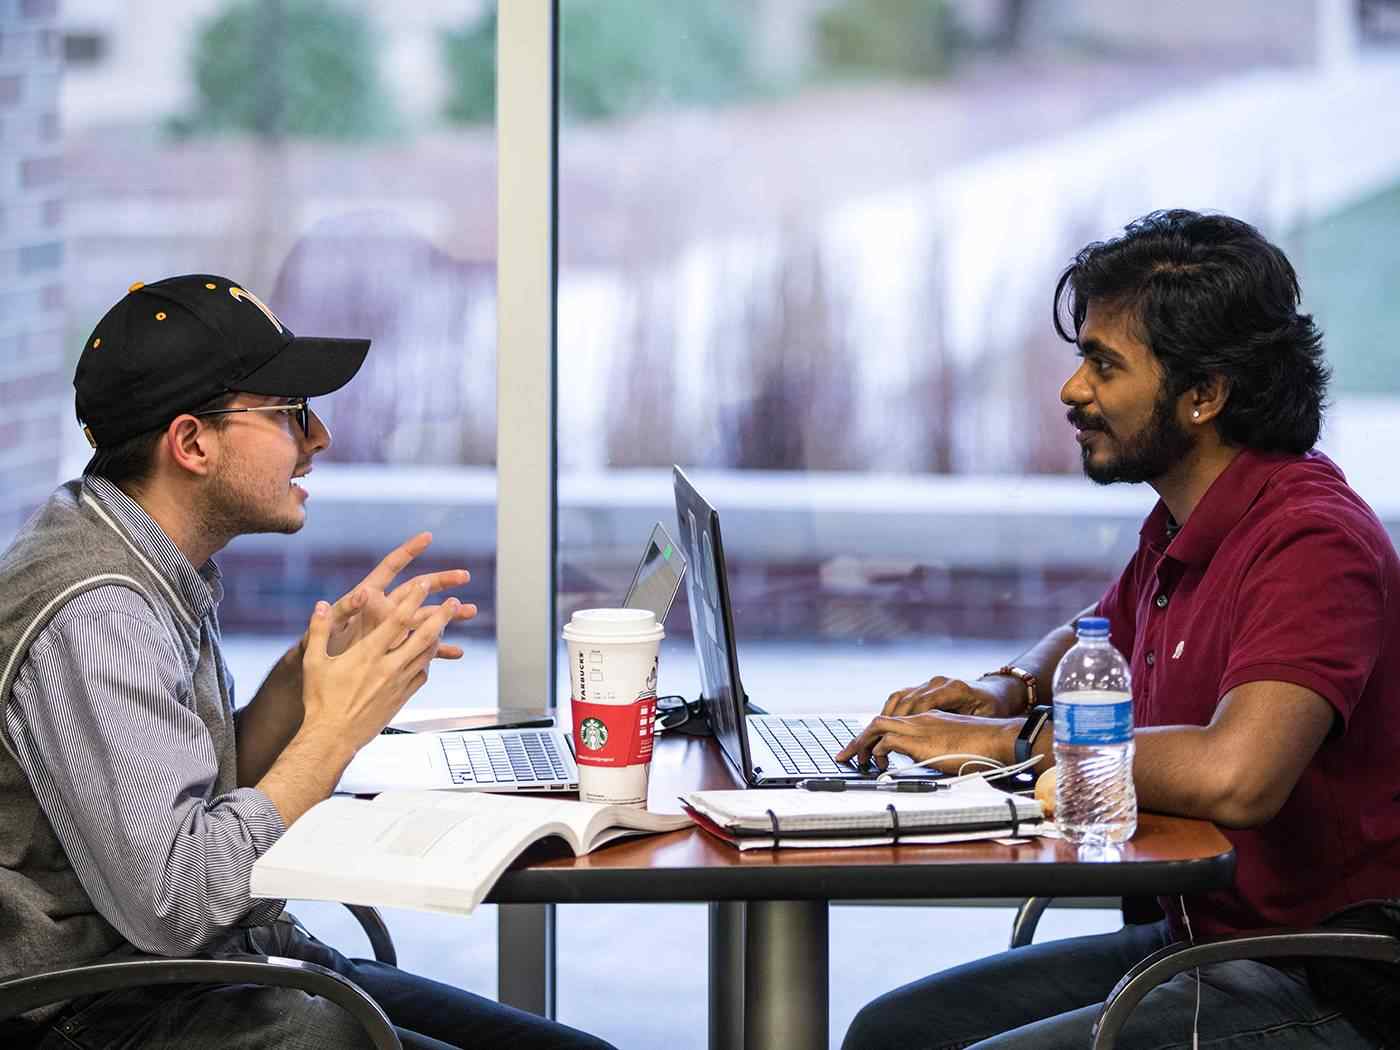 Two students discuss an assignment over coffee at the Rhatigan Student Center